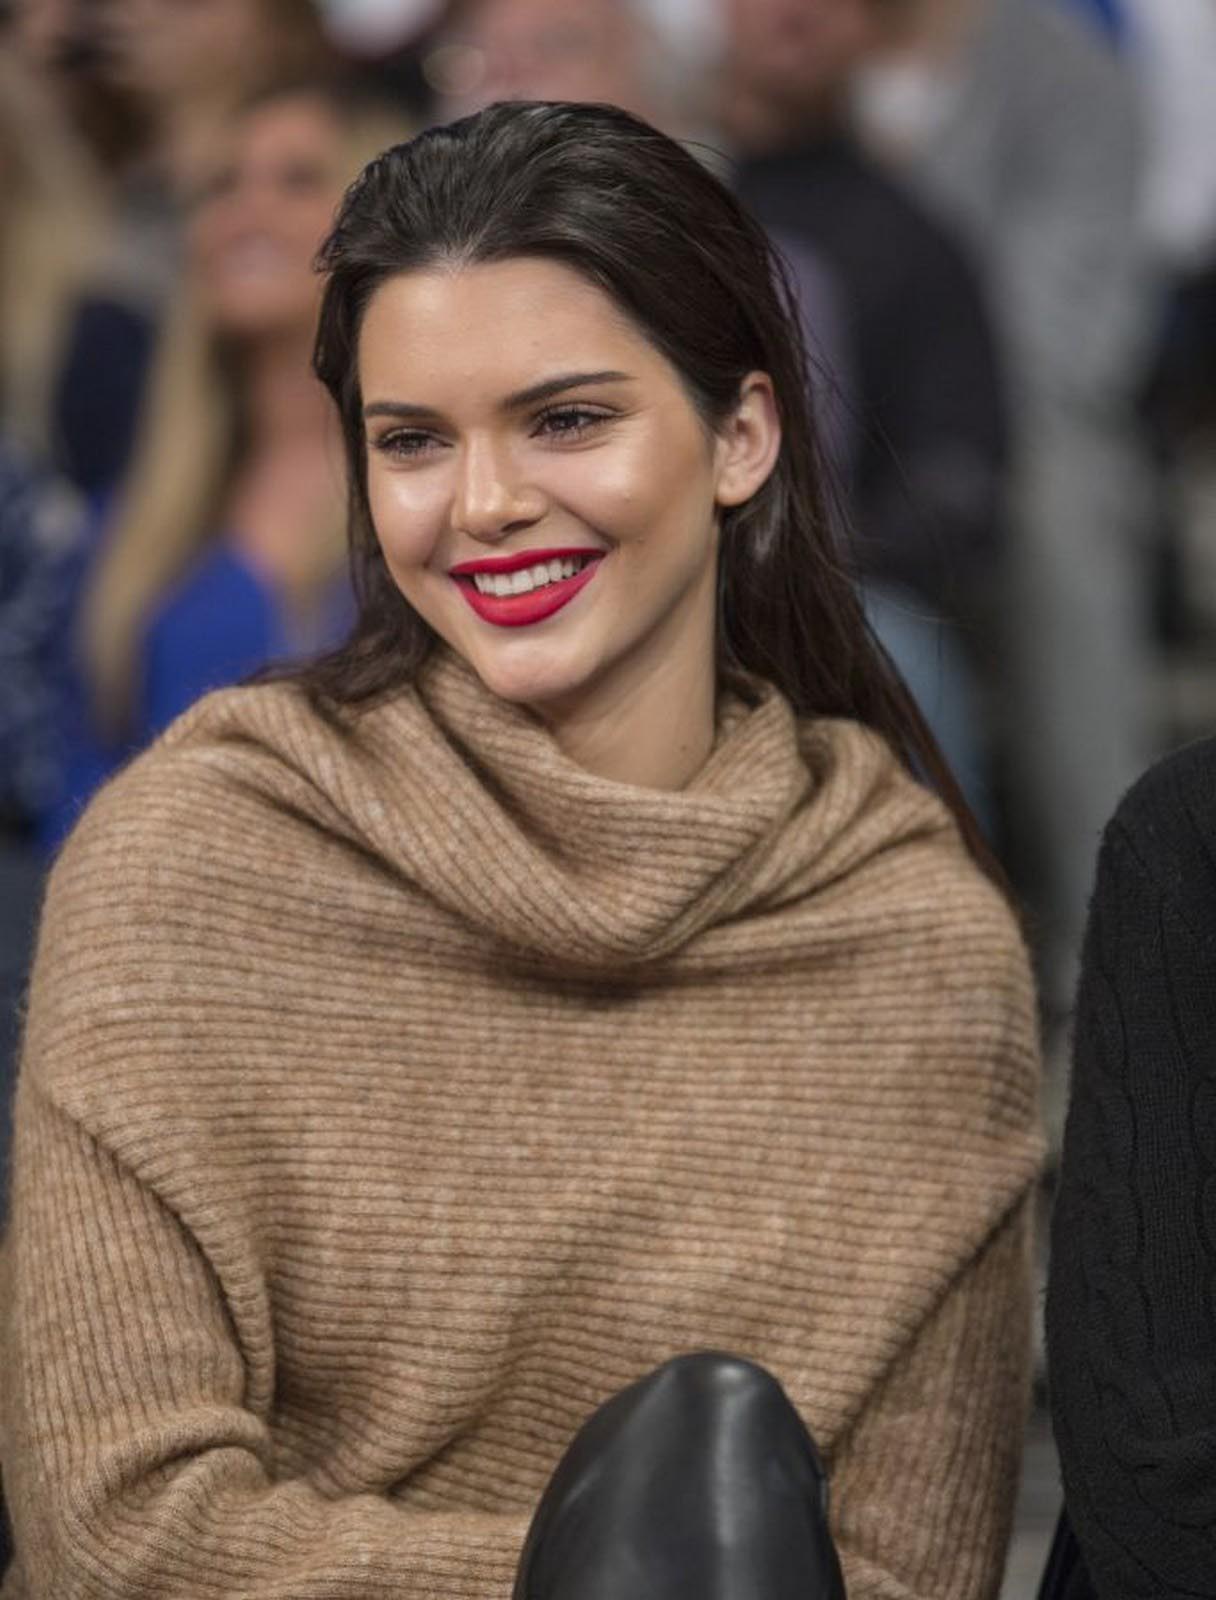 Kendall Jenner Photo Gallery 094a | Kendall Jenner Fans Site